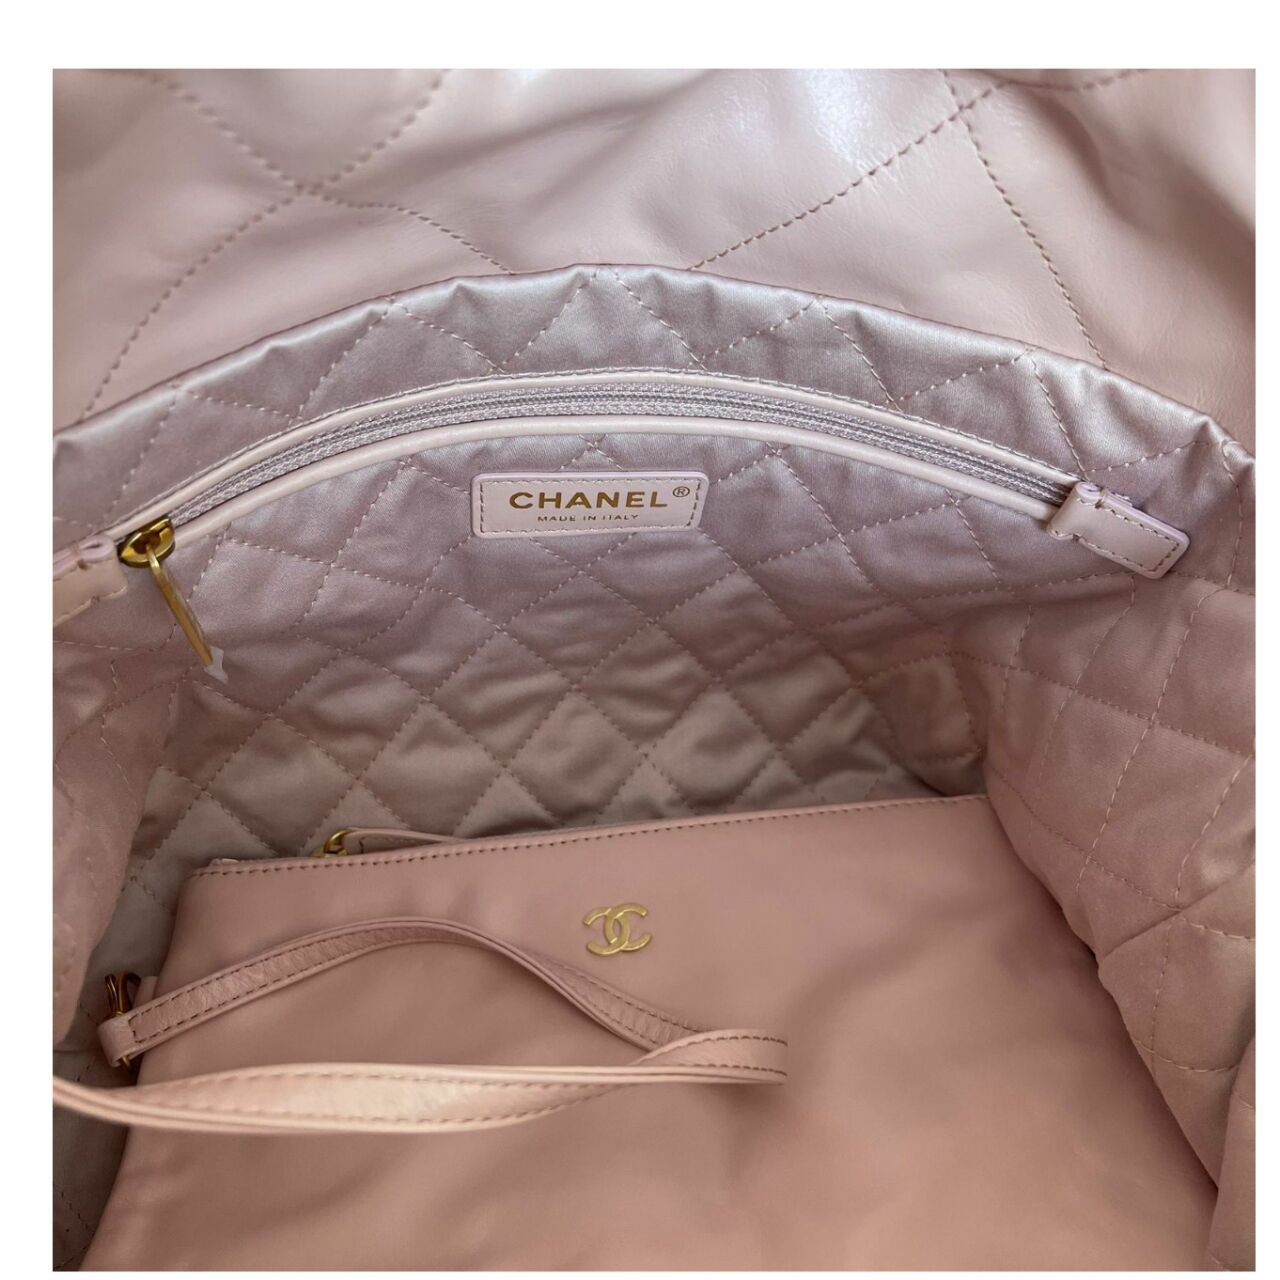 Chanel Metallic Calfskin Quilted Small Chanel 22 Pink